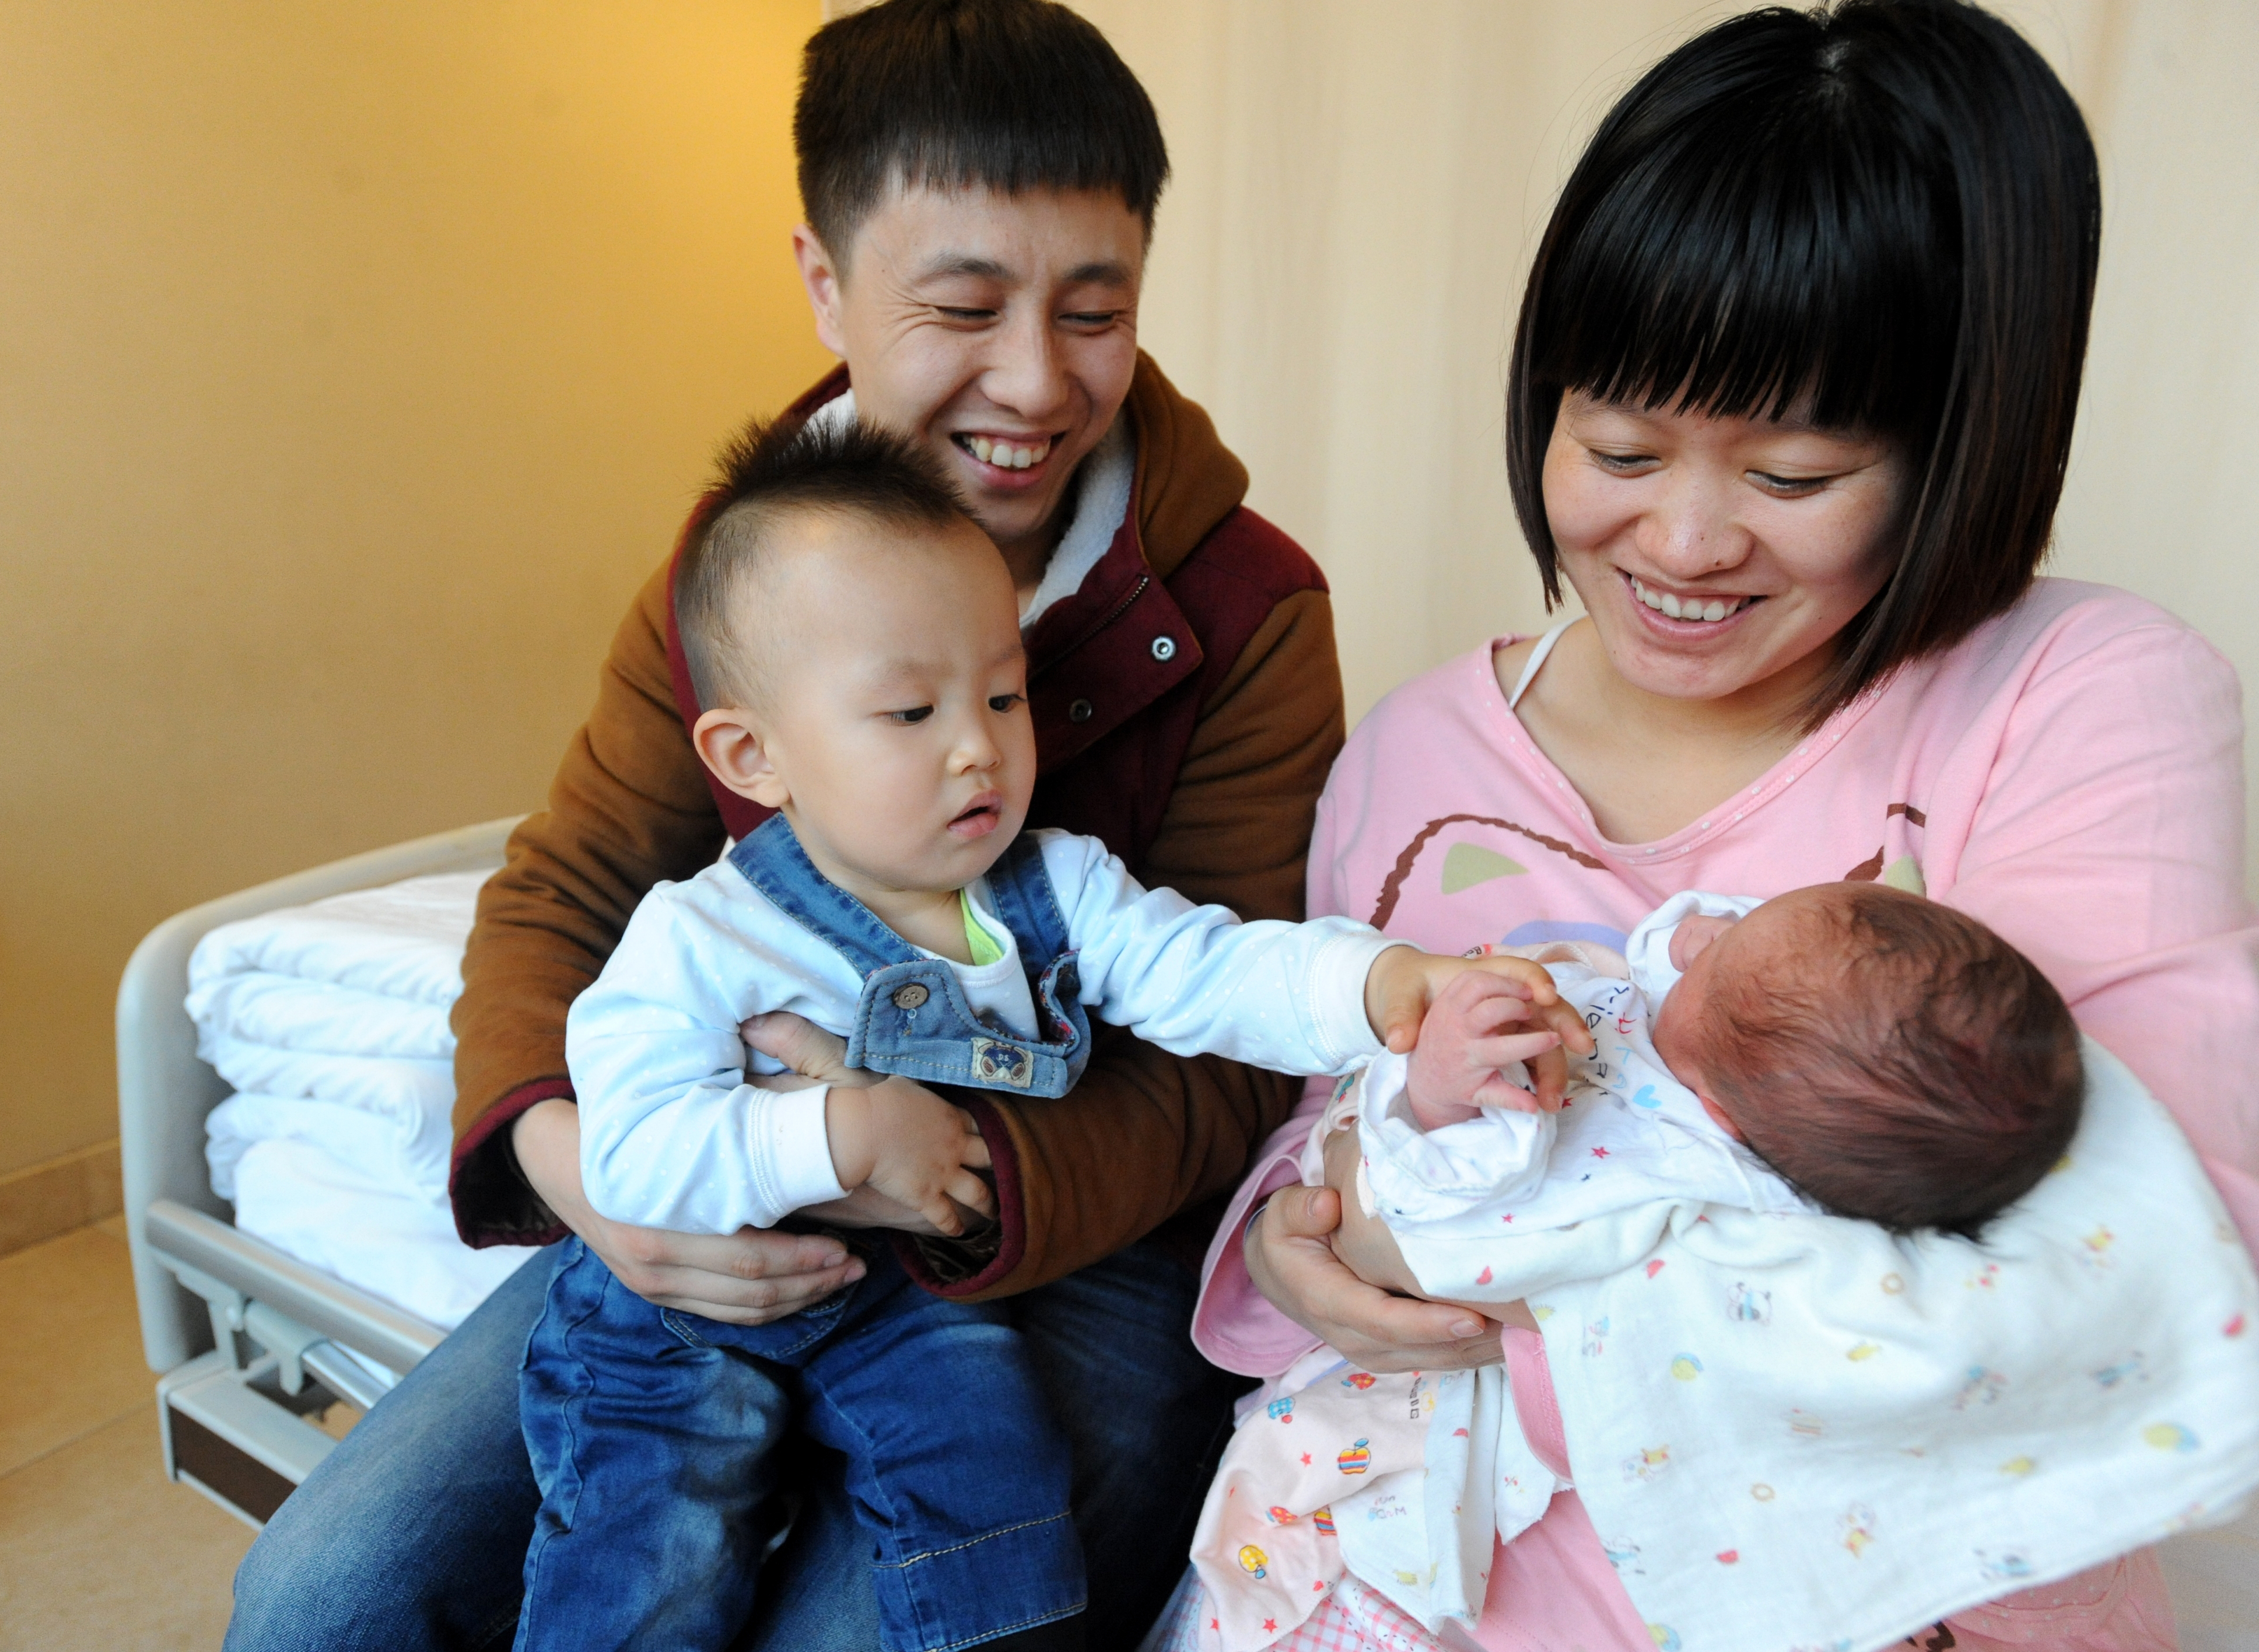 A couple smile as they look on their second child who was born at midnight on Jan. 1 at a hospital on Jan. 3, 2016, in Shenyang, China's Liaoning province. China has abandoned its 35-year-old one-child policy and started to allow all couples to have two children from Jan. 1, 2016, the Chinese Communist Party announced after a key meeting (VCG/Getty Images)